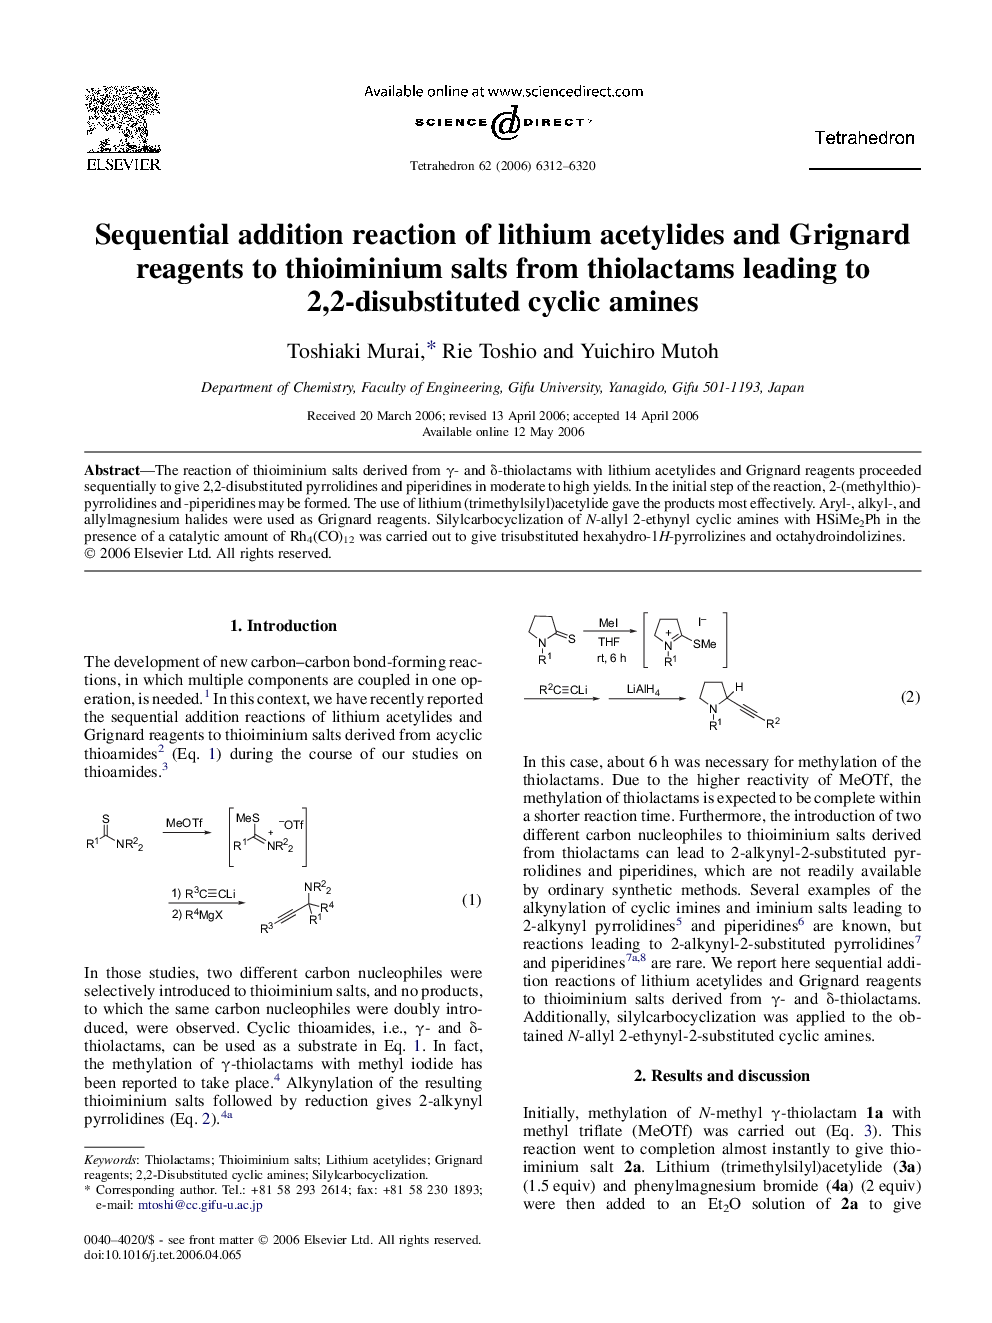 Sequential addition reaction of lithium acetylides and Grignard reagents to thioiminium salts from thiolactams leading to 2,2-disubstituted cyclic amines